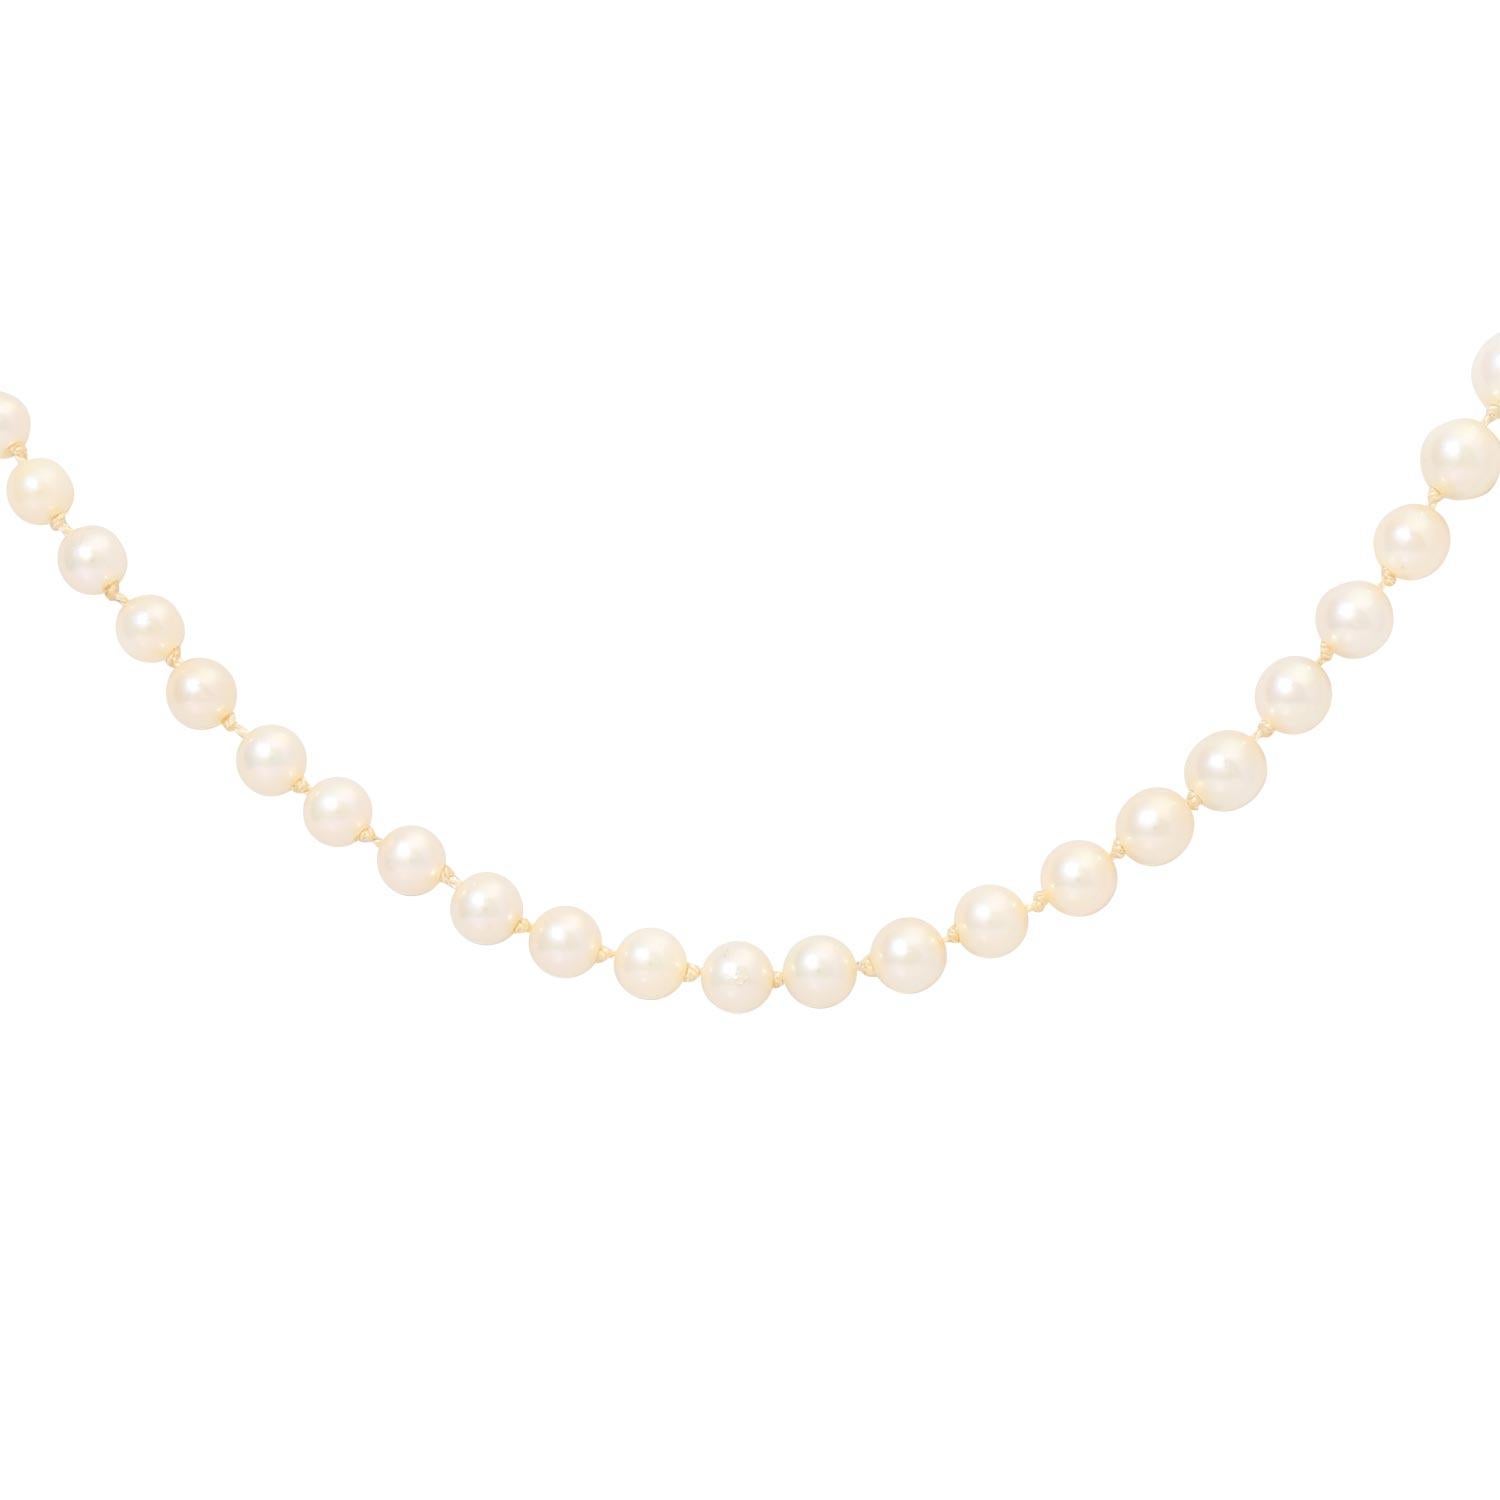 Breeding beads approx. 4.1-6.9 mm, closure GG 8k, length approx. 55 cm, mid-20th century, light traces of carrying. (10)

 Akoya Cultured Pearl Necklace approx. 4.1-6.9 mm, Clasp 8k YG, L: approx. 55 cm, mid-20th century, minor signs of wear.